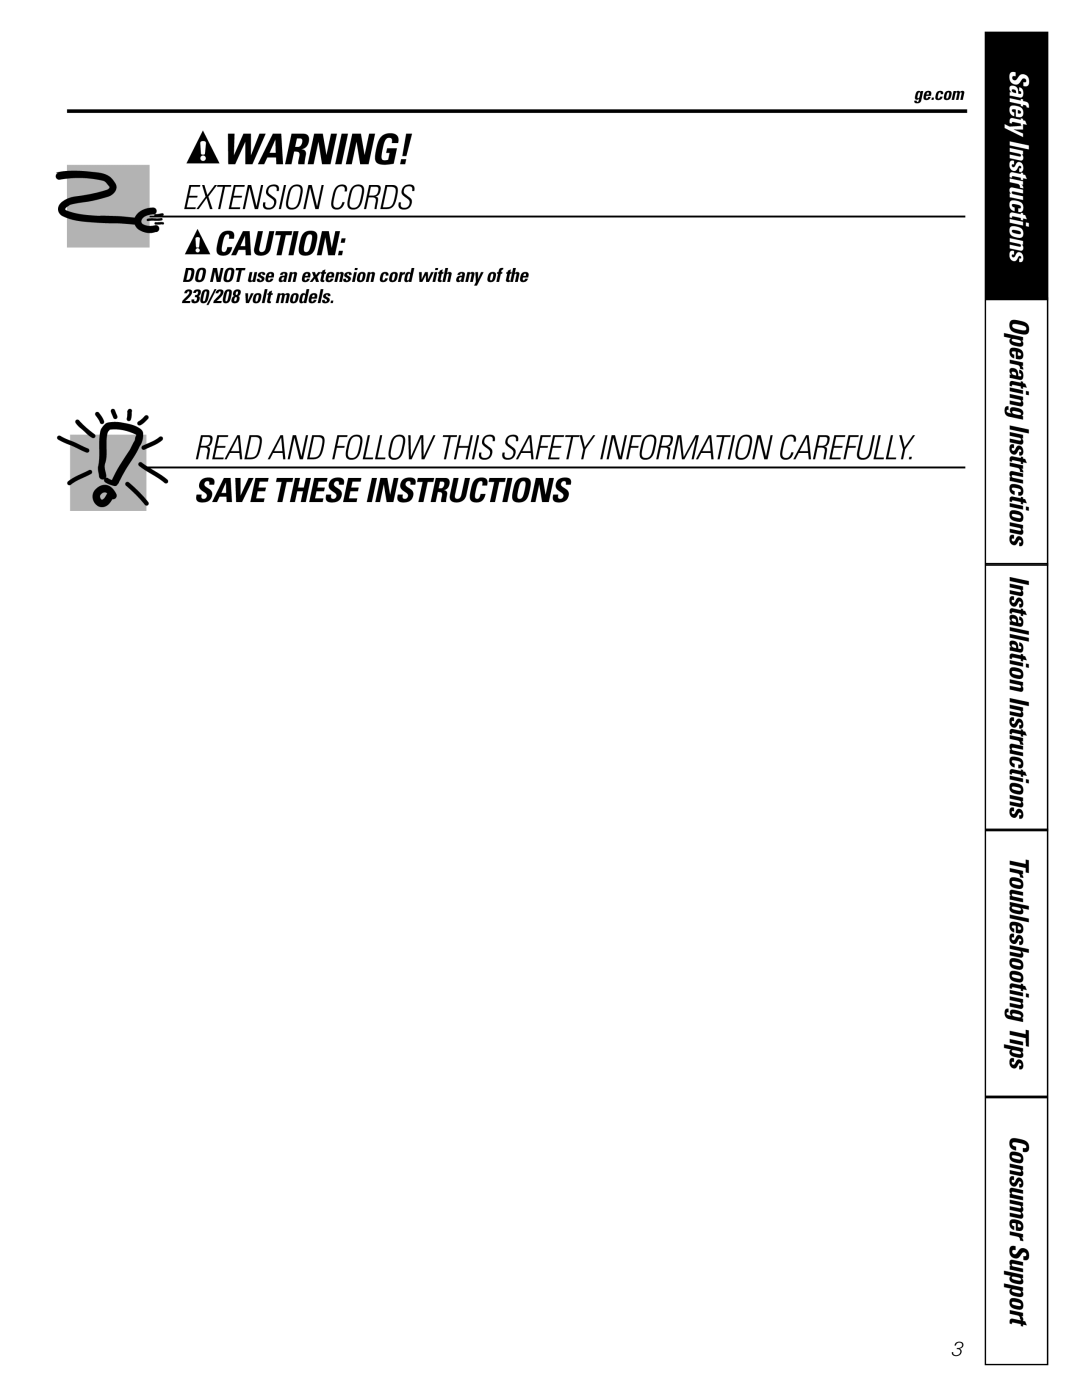 GE AEH24, AEV24 Extension Cords, Save These Instructions, DO NOT use an extension cord with any of the 230/208 volt models 